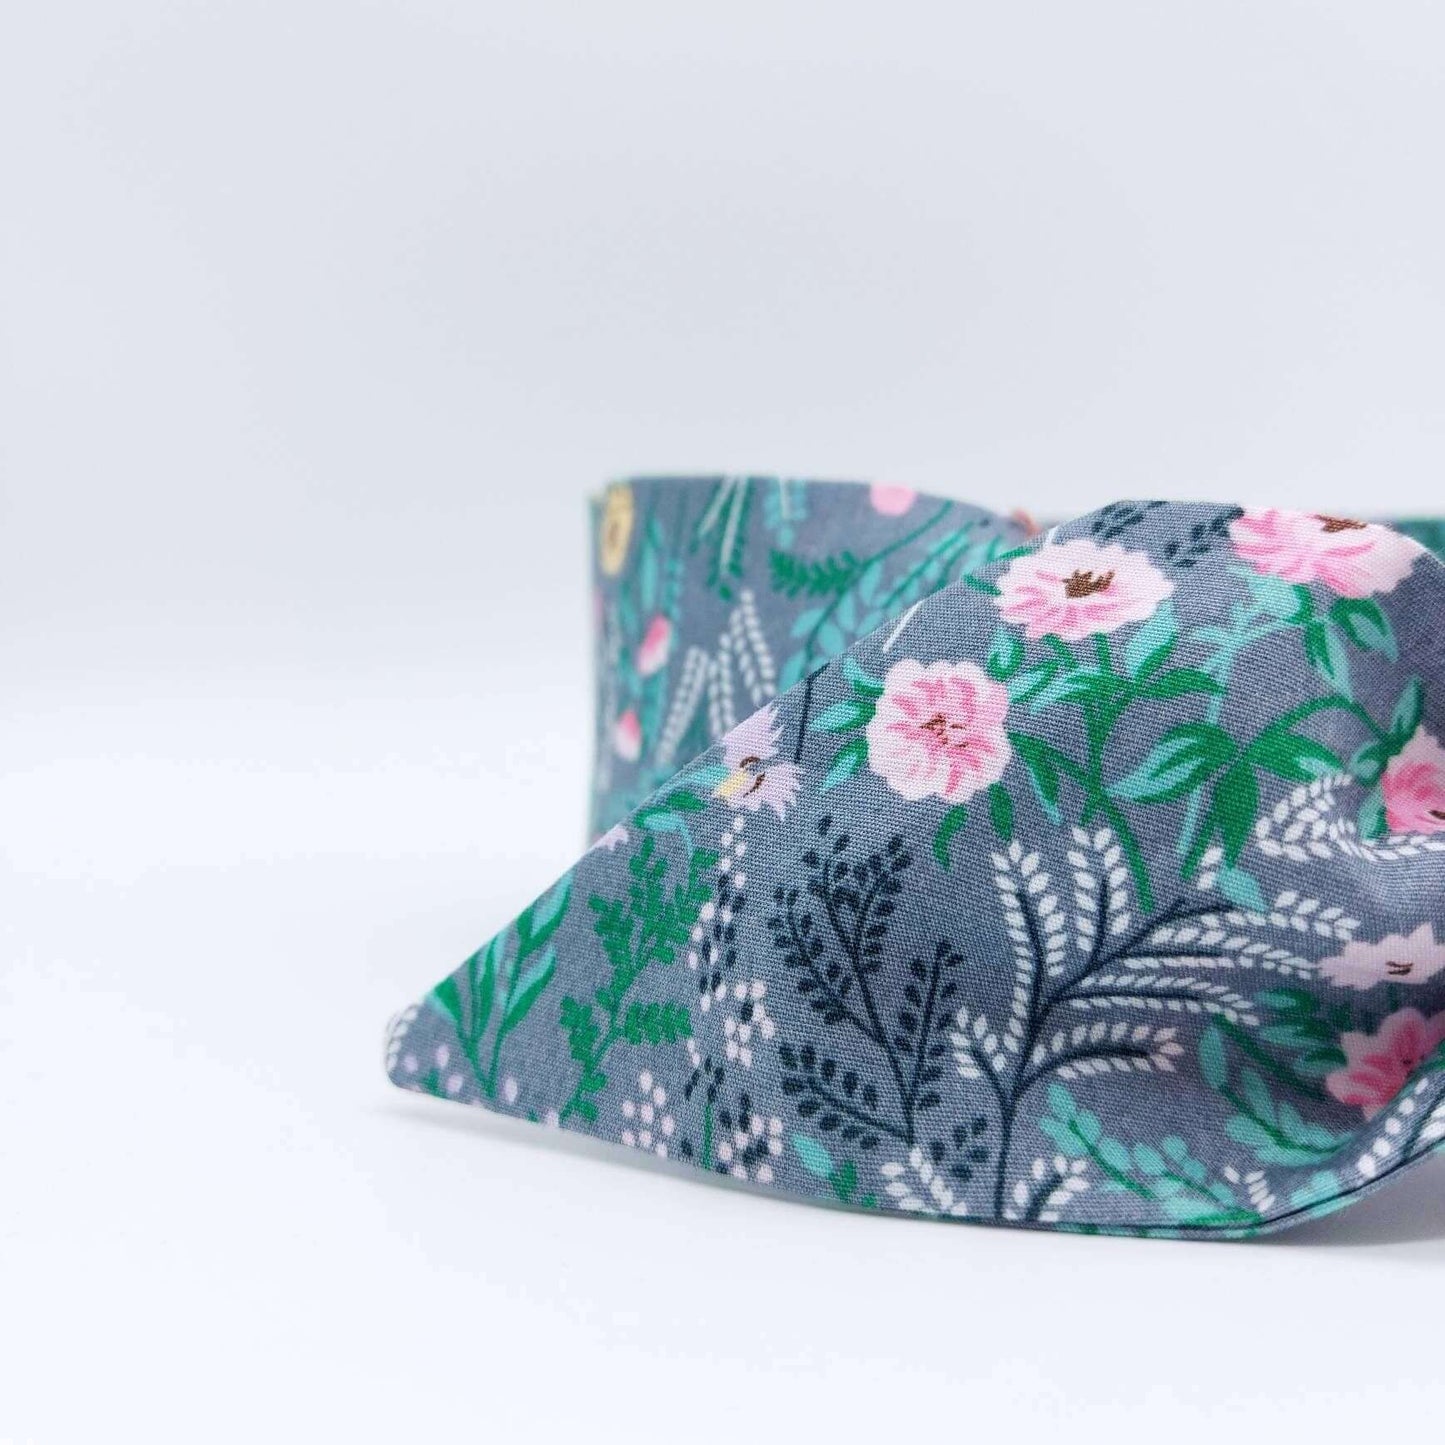 A summery, pale grey, ditsy floral cotton headscarf with tiny pink and green flowers, tied in a pretty knot..